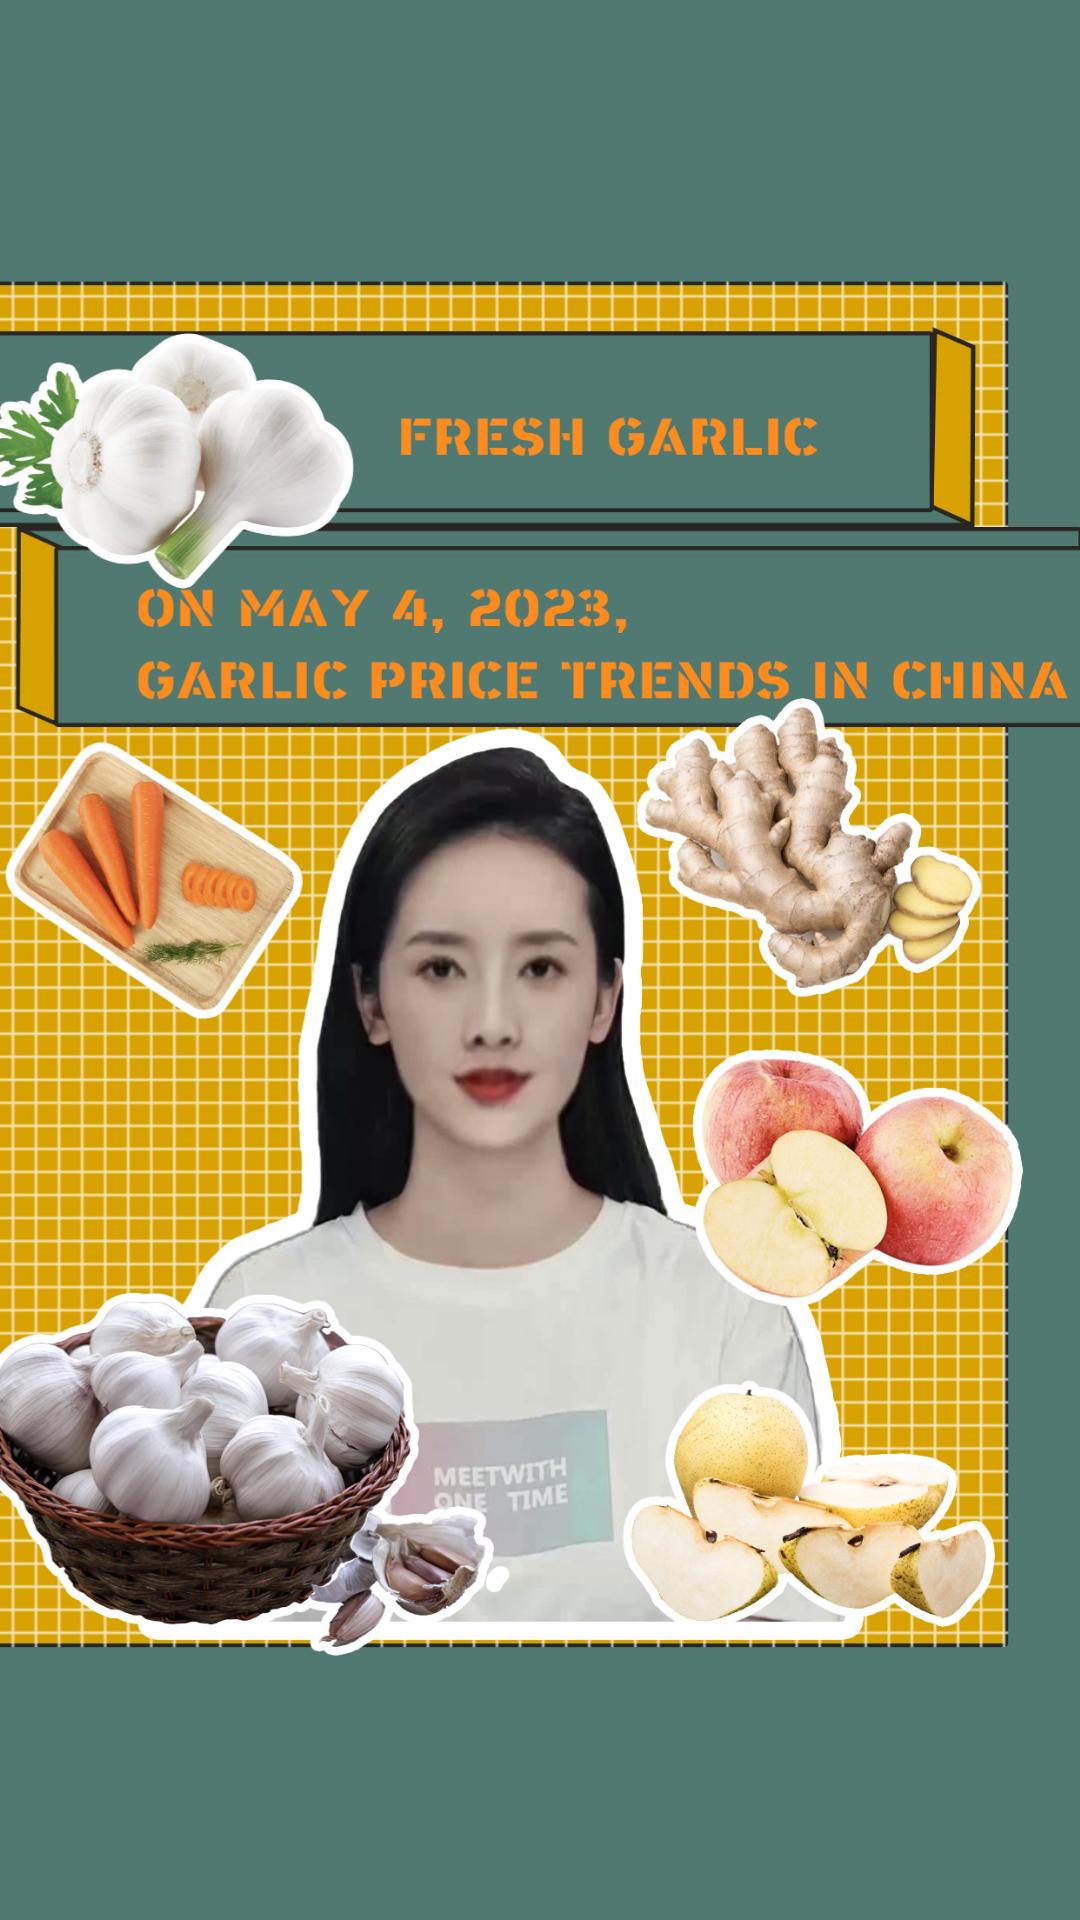 ON MAY 4, 2023,GARLIC PRICE TRENDS IN CHINA